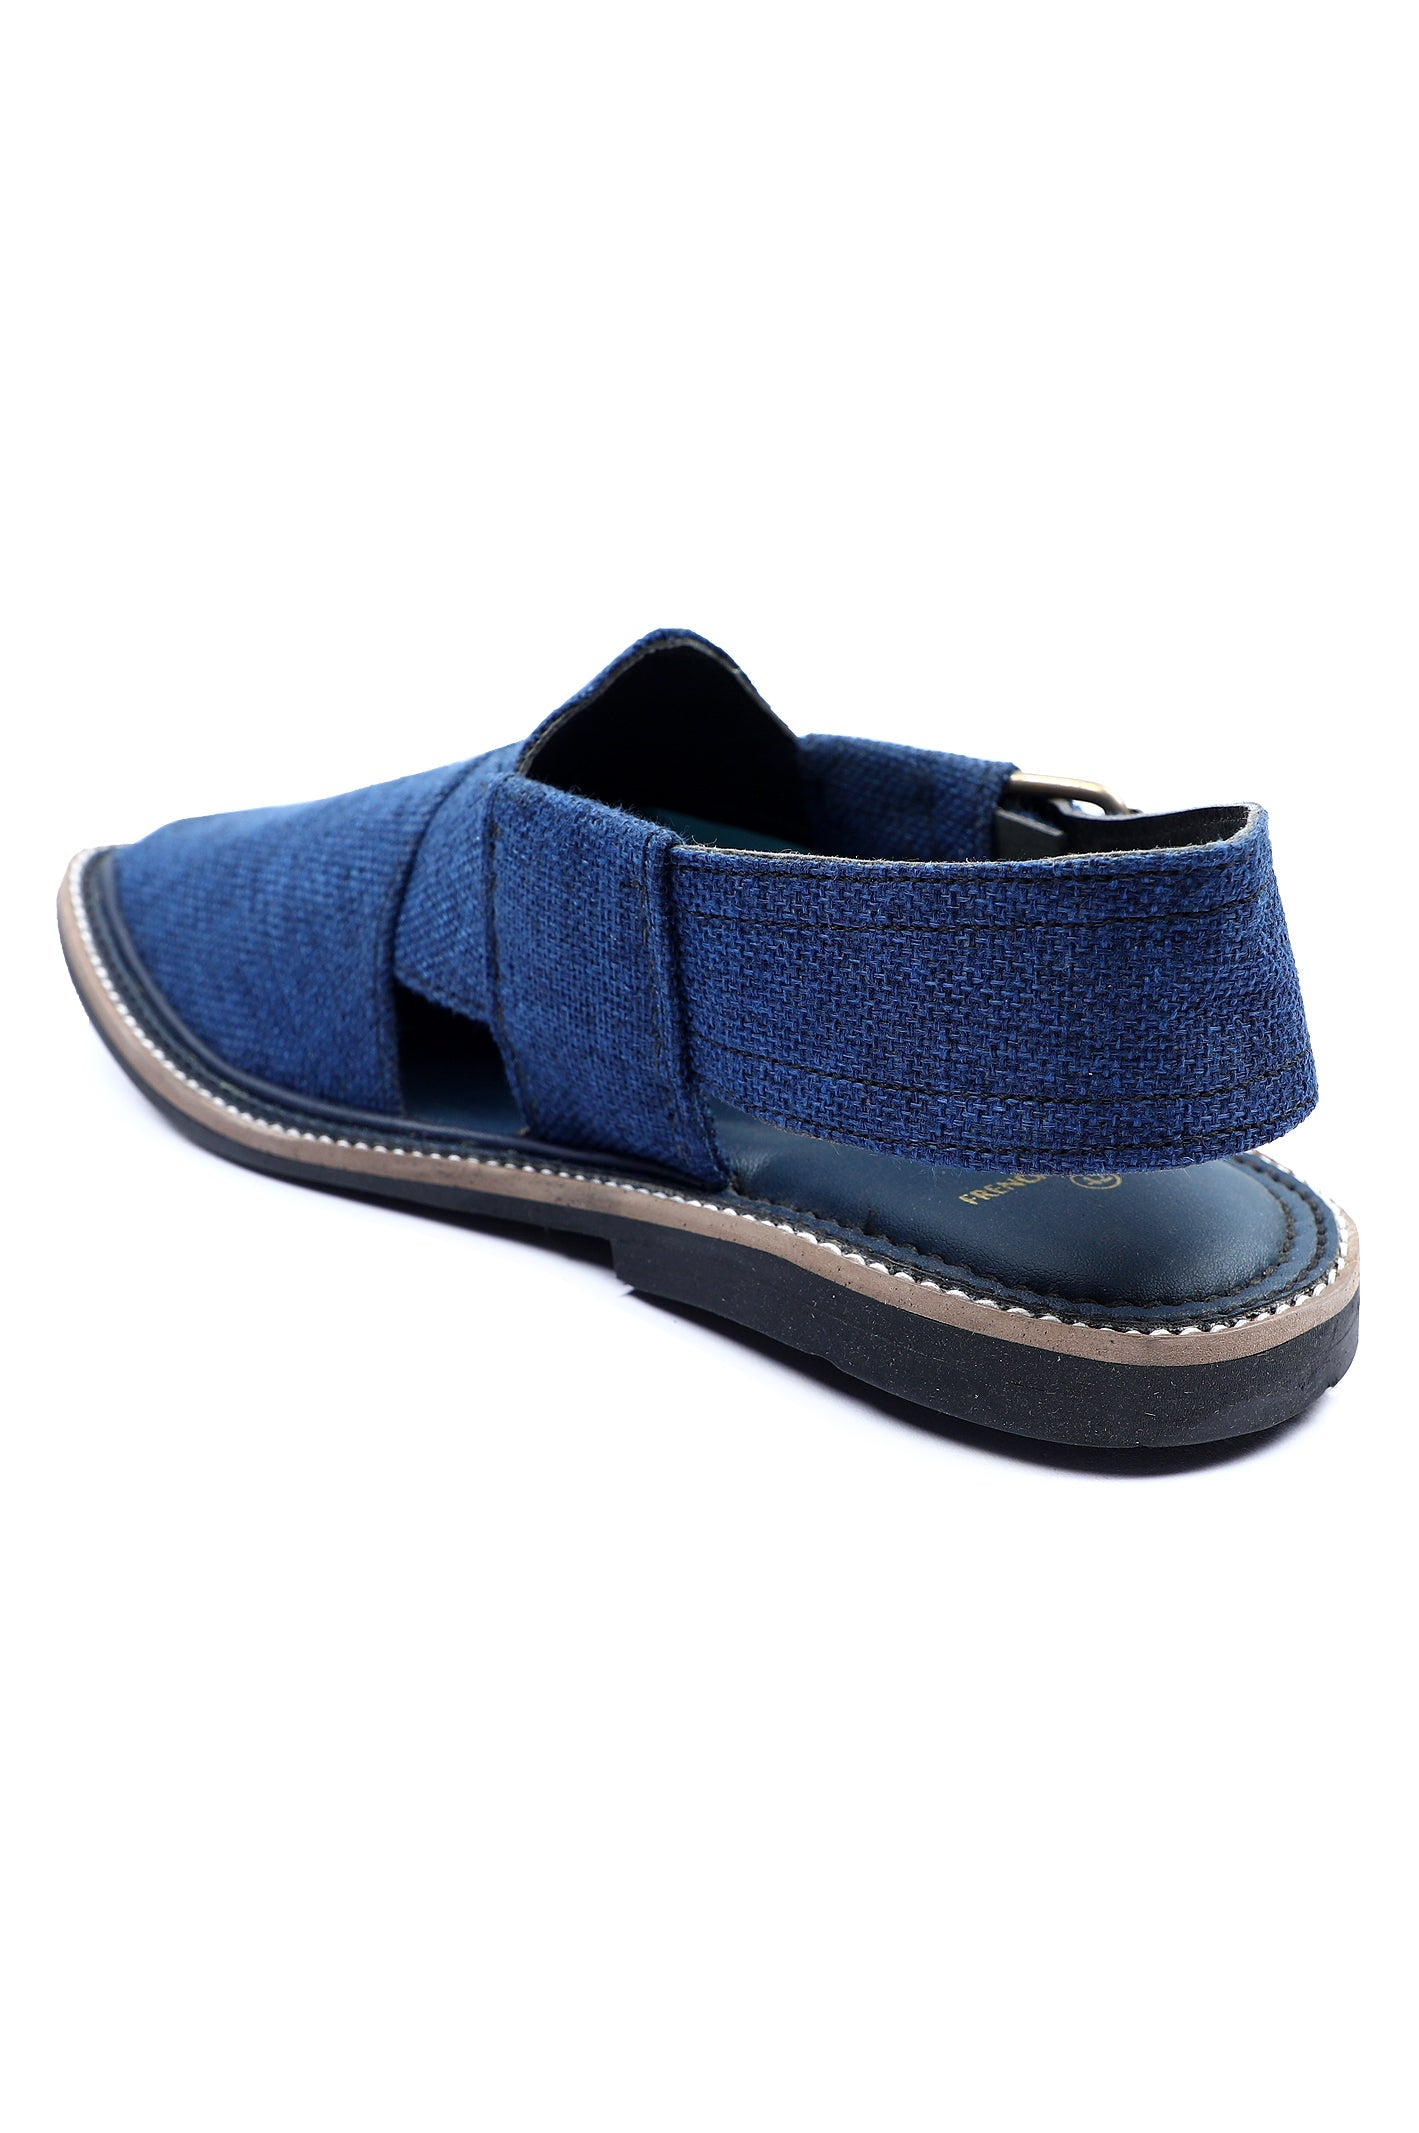 French Emporio Men Sandals SKU: PSLD-0049-BLUE - Diners